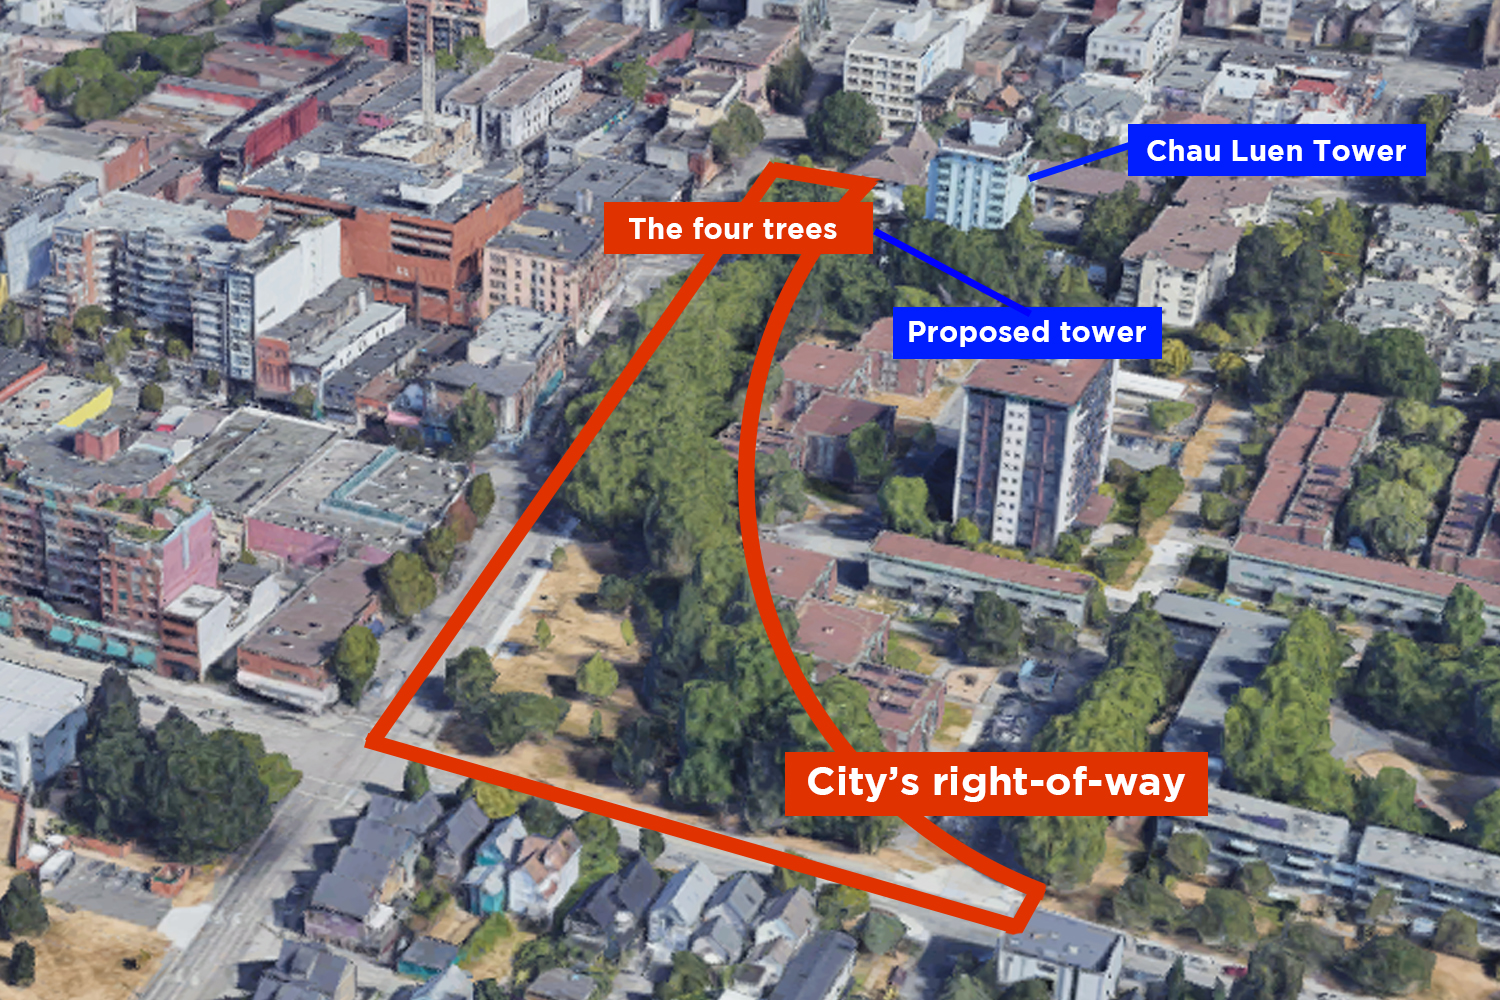 An aerial map of Vancouver’s Chinatown, showing a strip of grassy land with trees once intended for a road coming off the highway, which was cancelled.